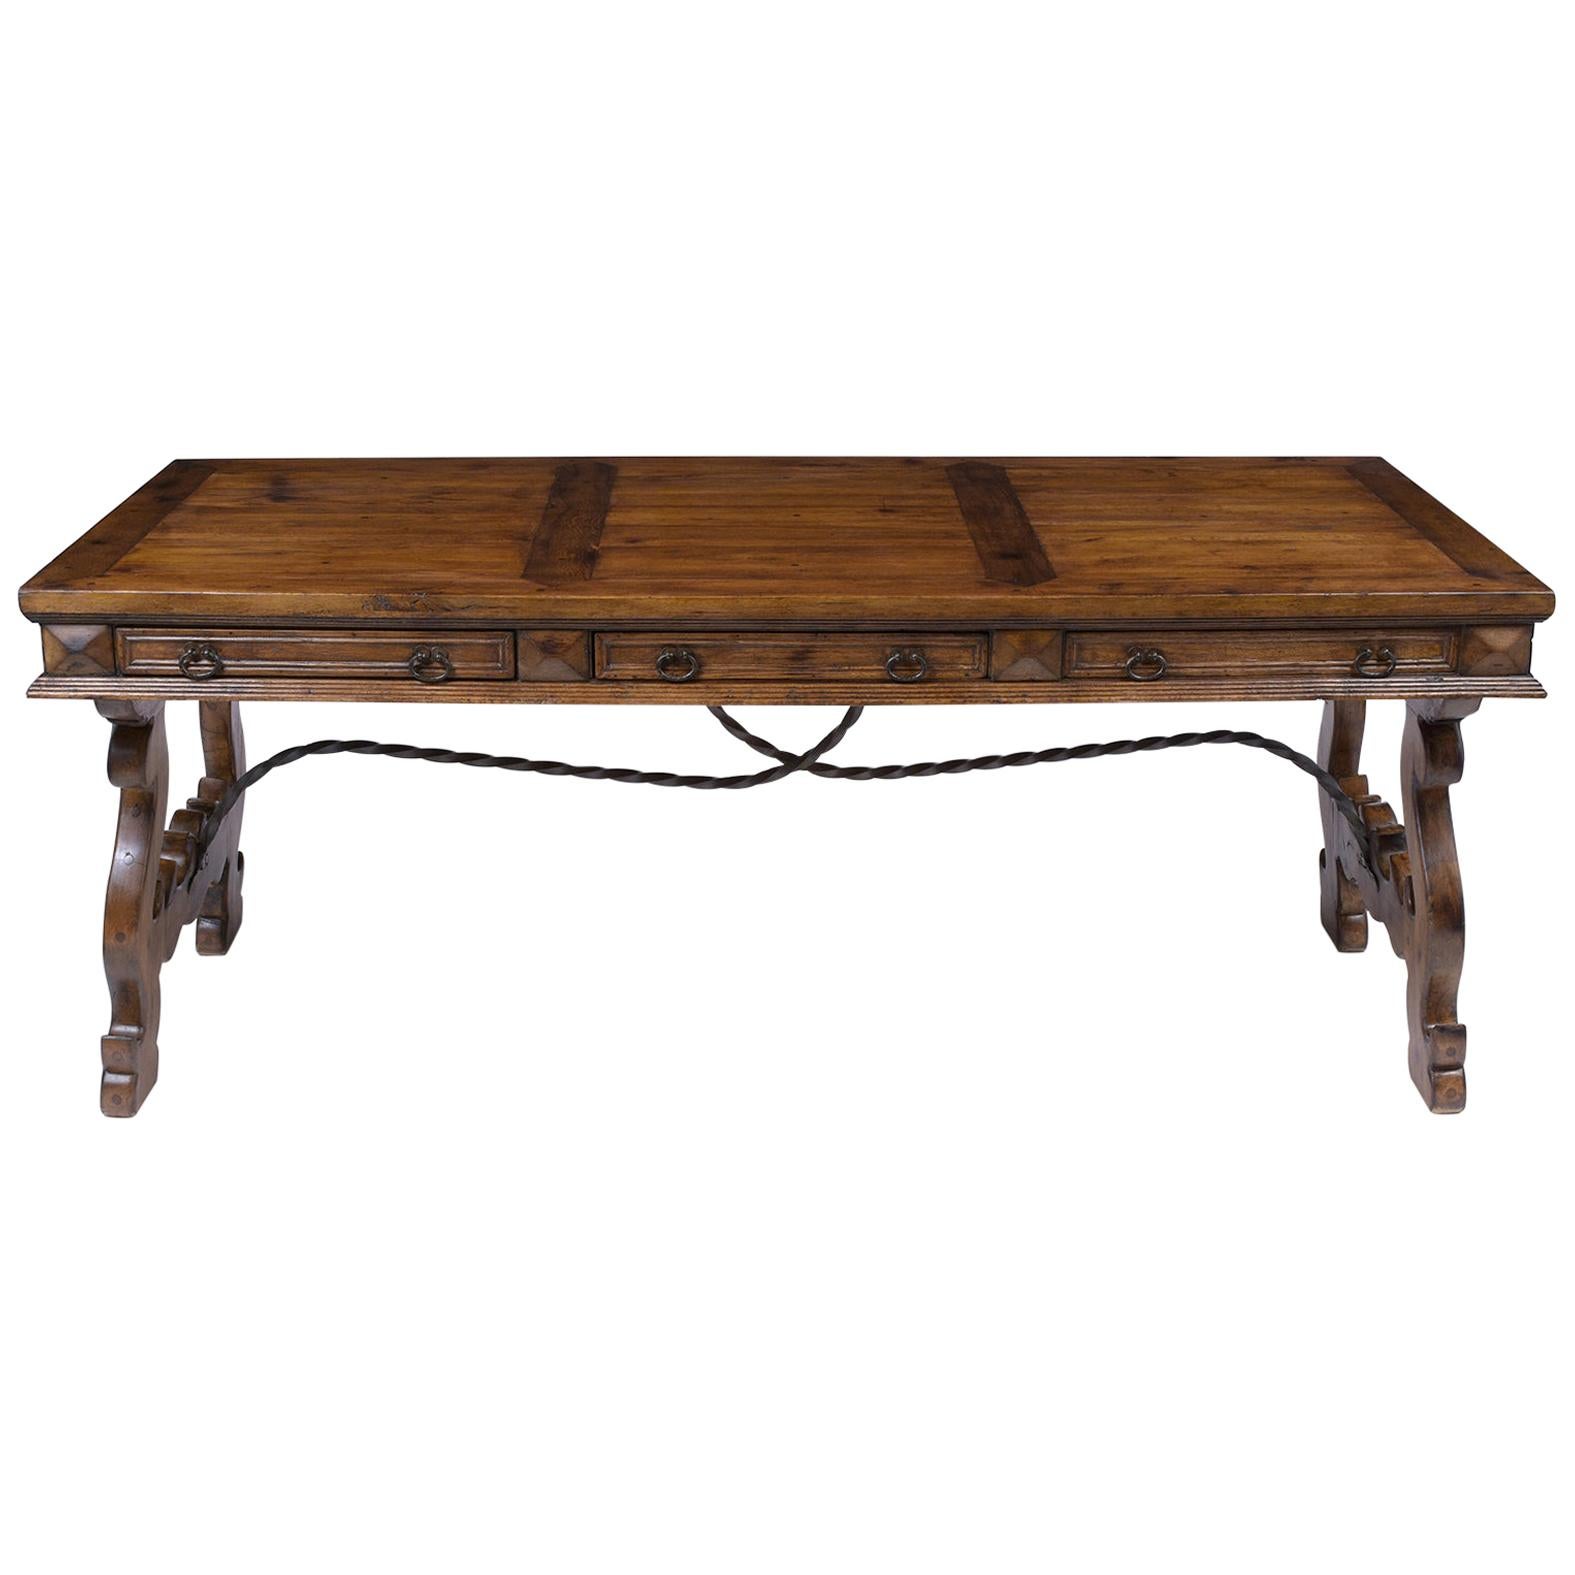 An extraordinary vintage Spanish colonial dining table is hand-crafted out of solid oak wood and has been completely restored by our professional team of expert craftsmen. This beautiful dining room table features a rich dark walnut color stain, a